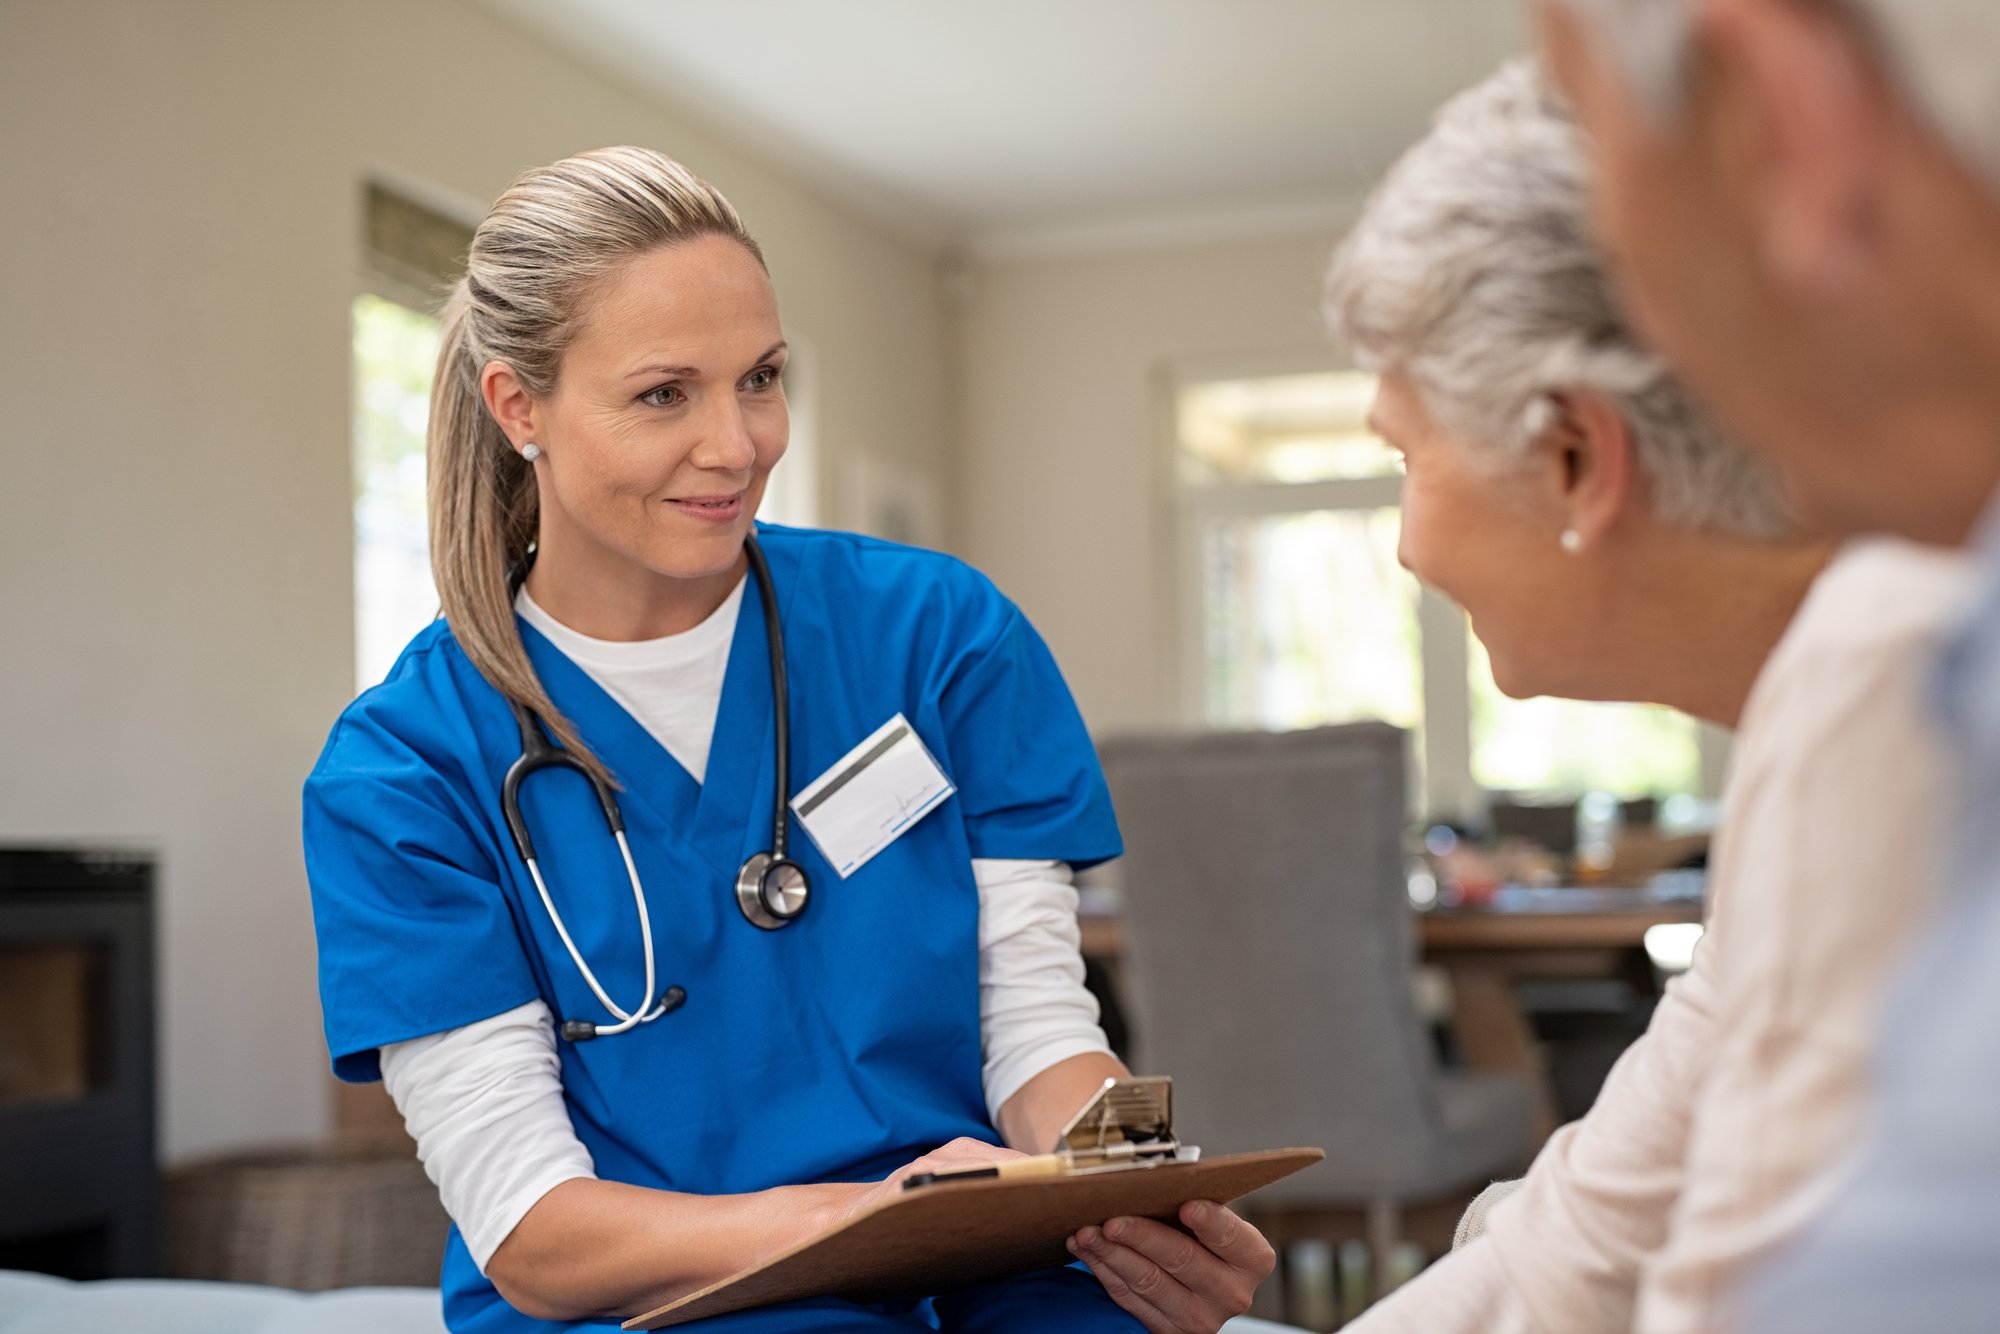 Why should you becoming a family nurse practitioner?